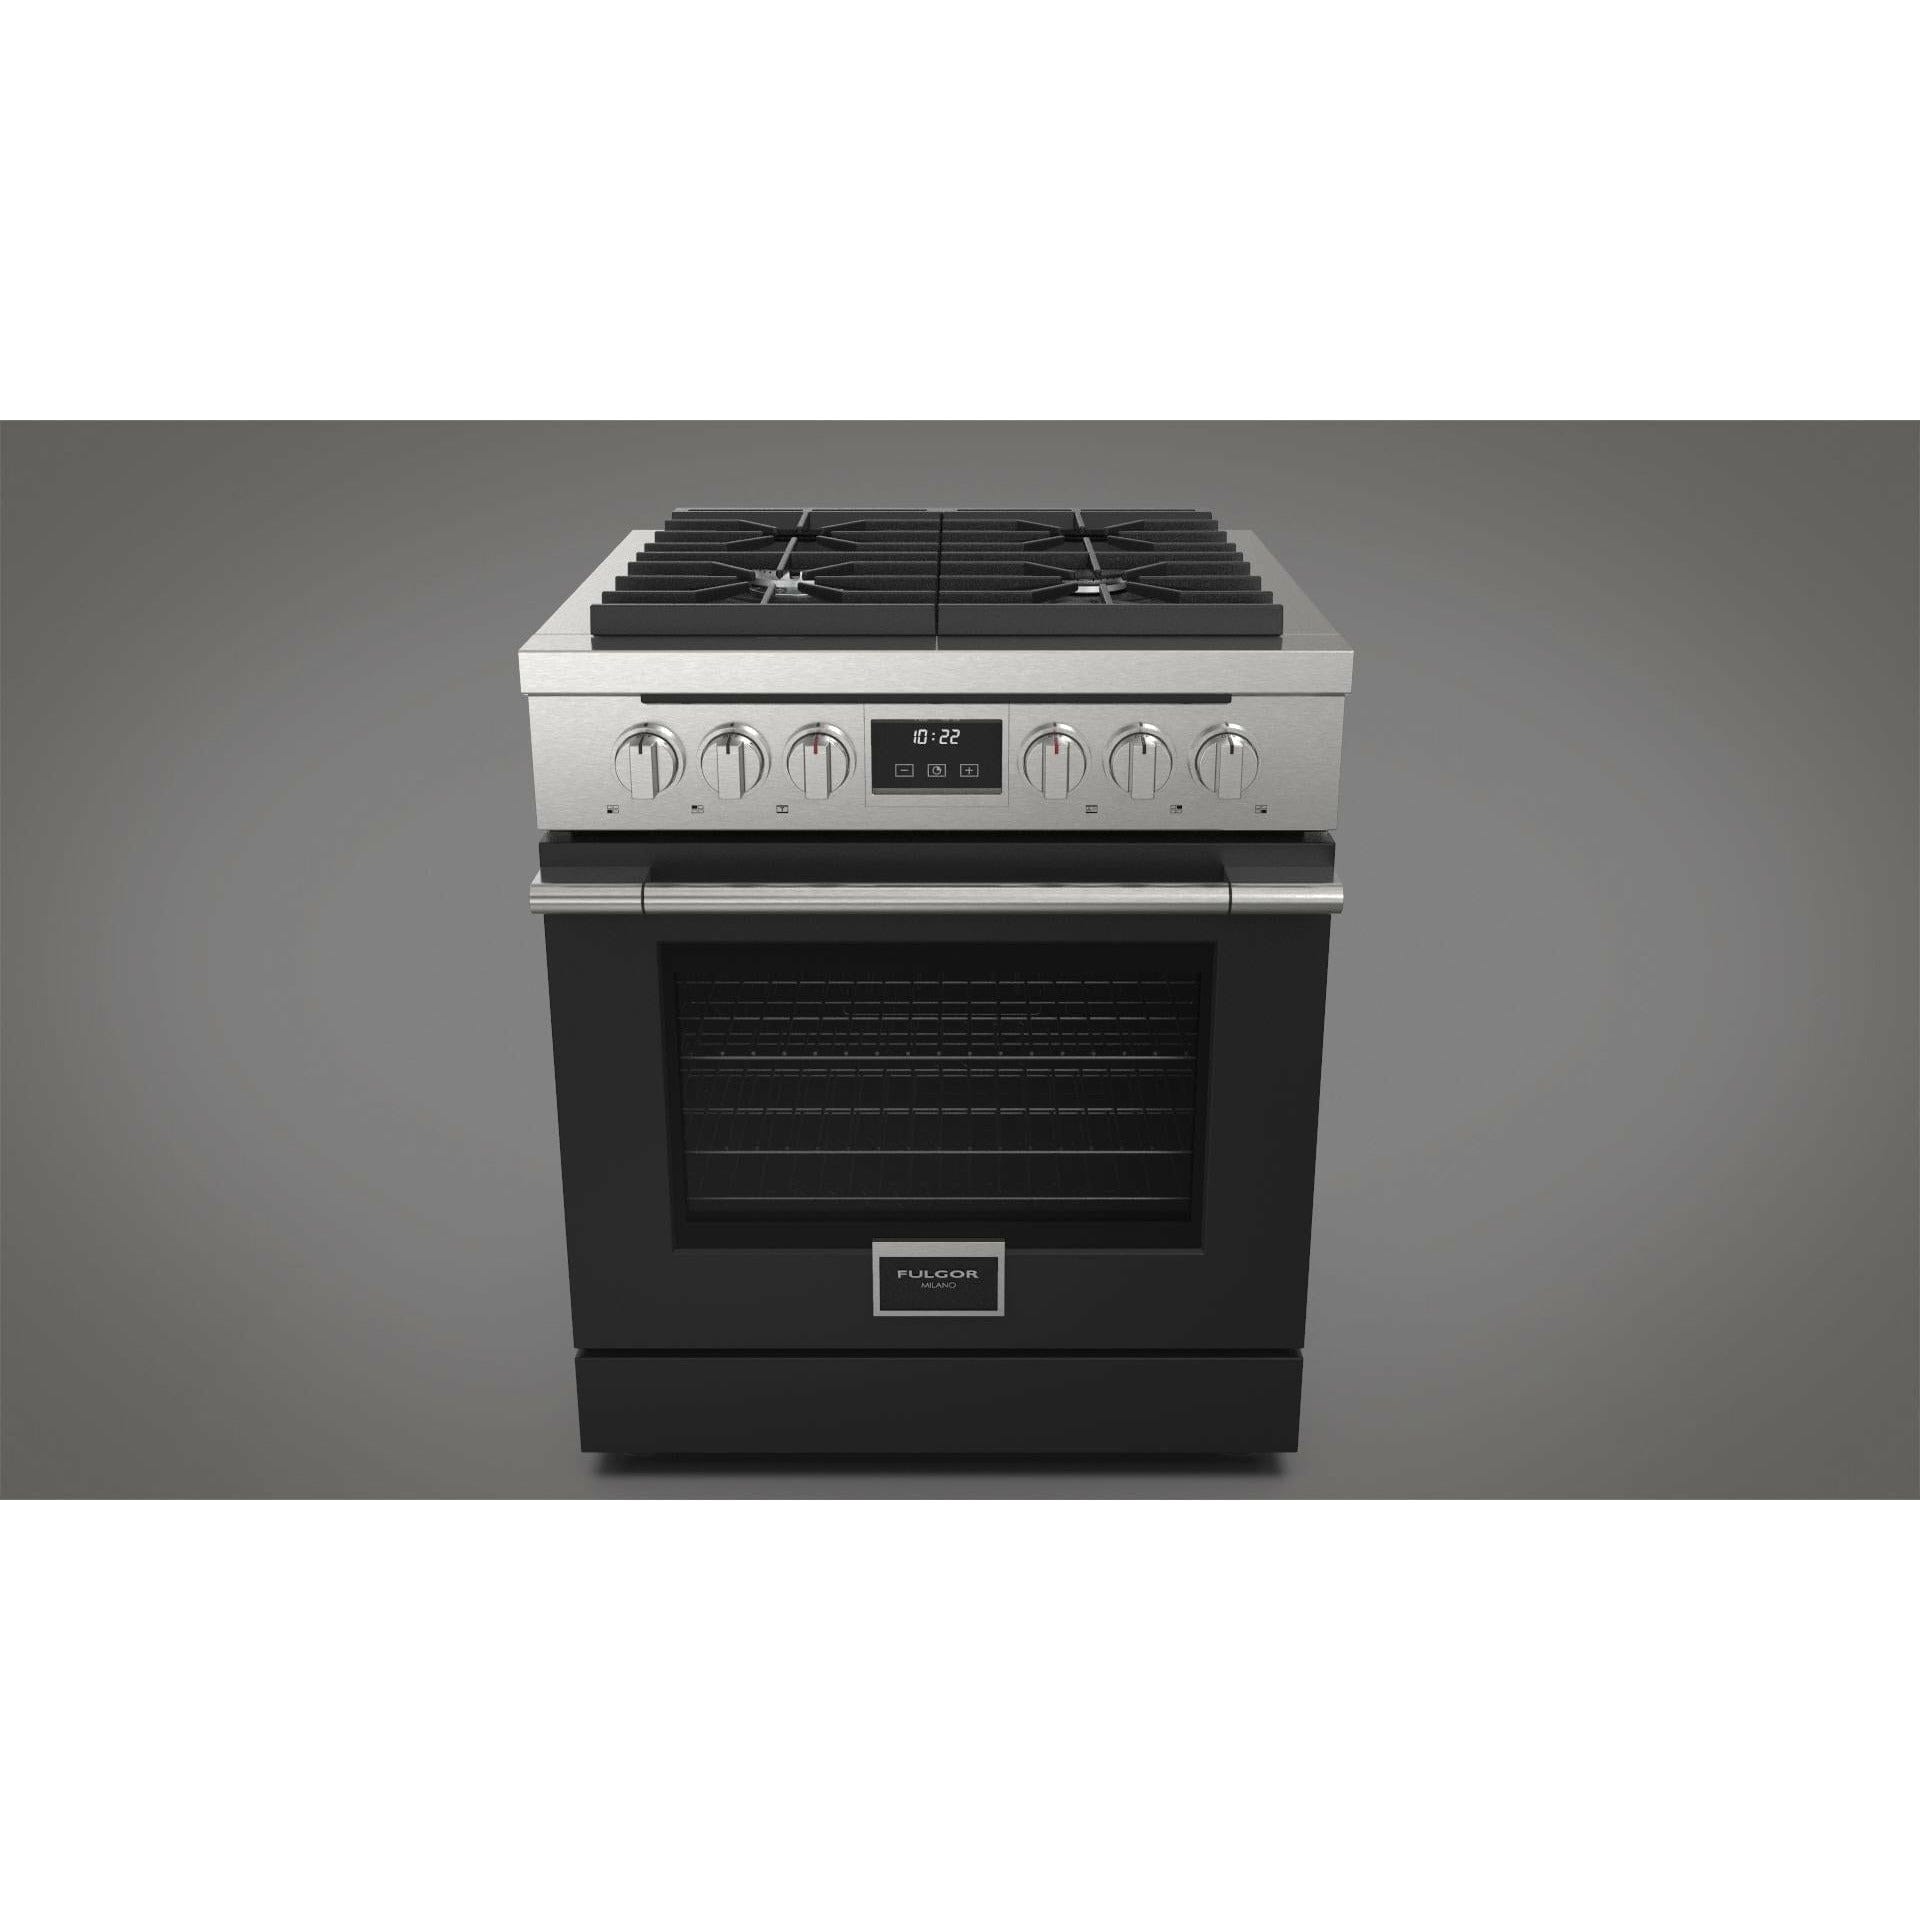 Fulgor Milano 30" Freestanding All Gas Range with 2 Duel Flame Burners, Stainless Steel - F4PGR304S2 Ranges ACDKIT30MB Luxury Appliances Direct